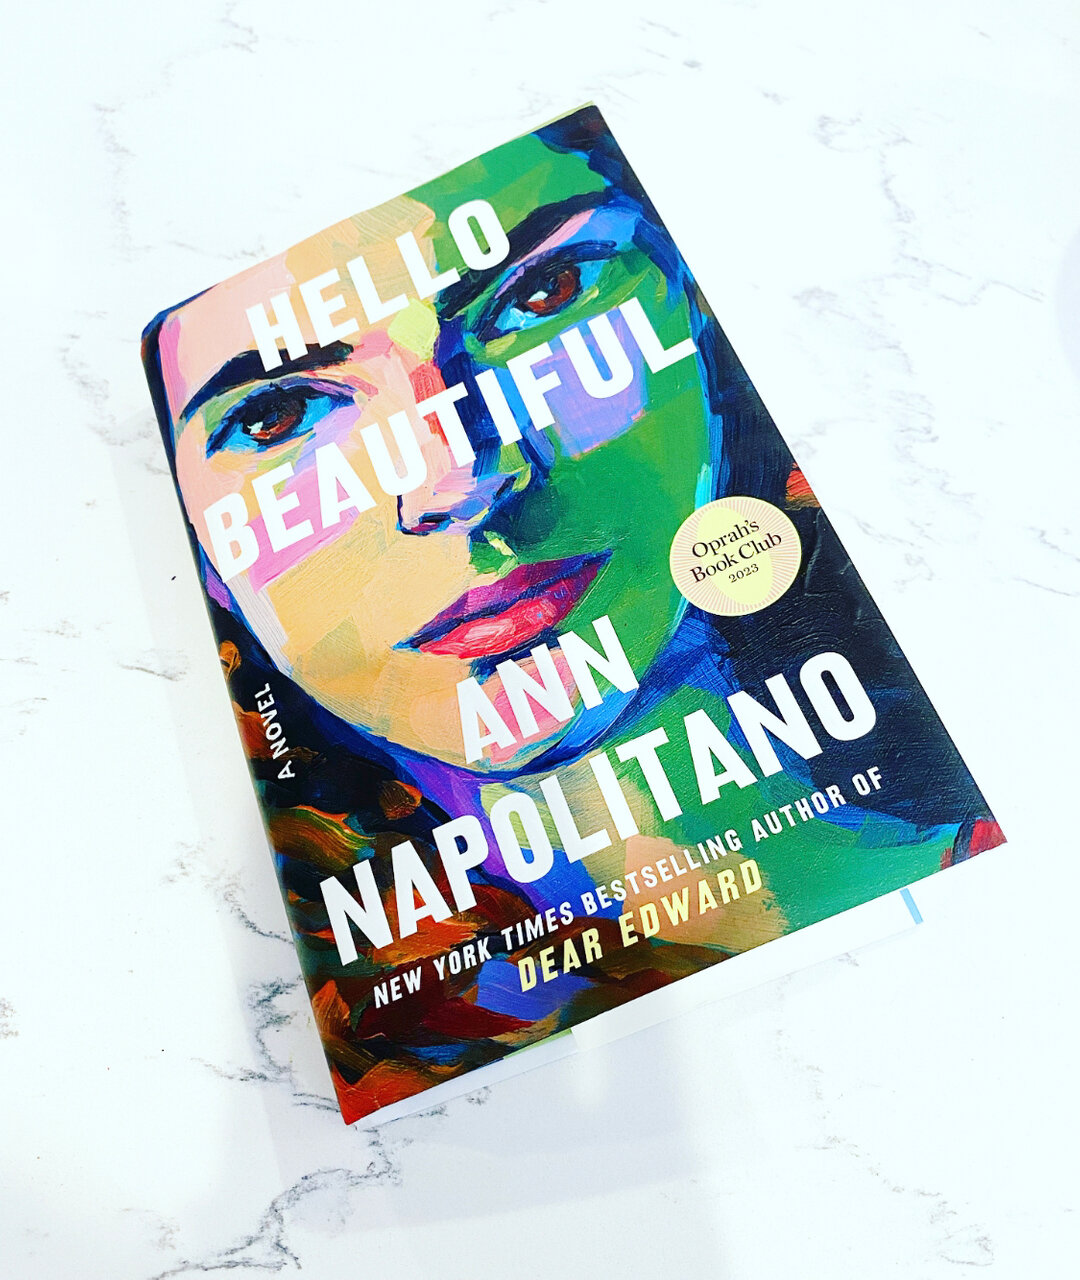 Hello Beautiful| by Ann Napolitano​​​​​​​​
​​​​​​​​
REVIEW: What is the hype?​​​​​​​​
#ITSLITBOOKSREVIEW​​​​​​​​
​​​​​​​​
SYNOPSIS: William Waters is a man who grew up alone. When he meets Julia Padavano, his whole life changes as she welcomes him in